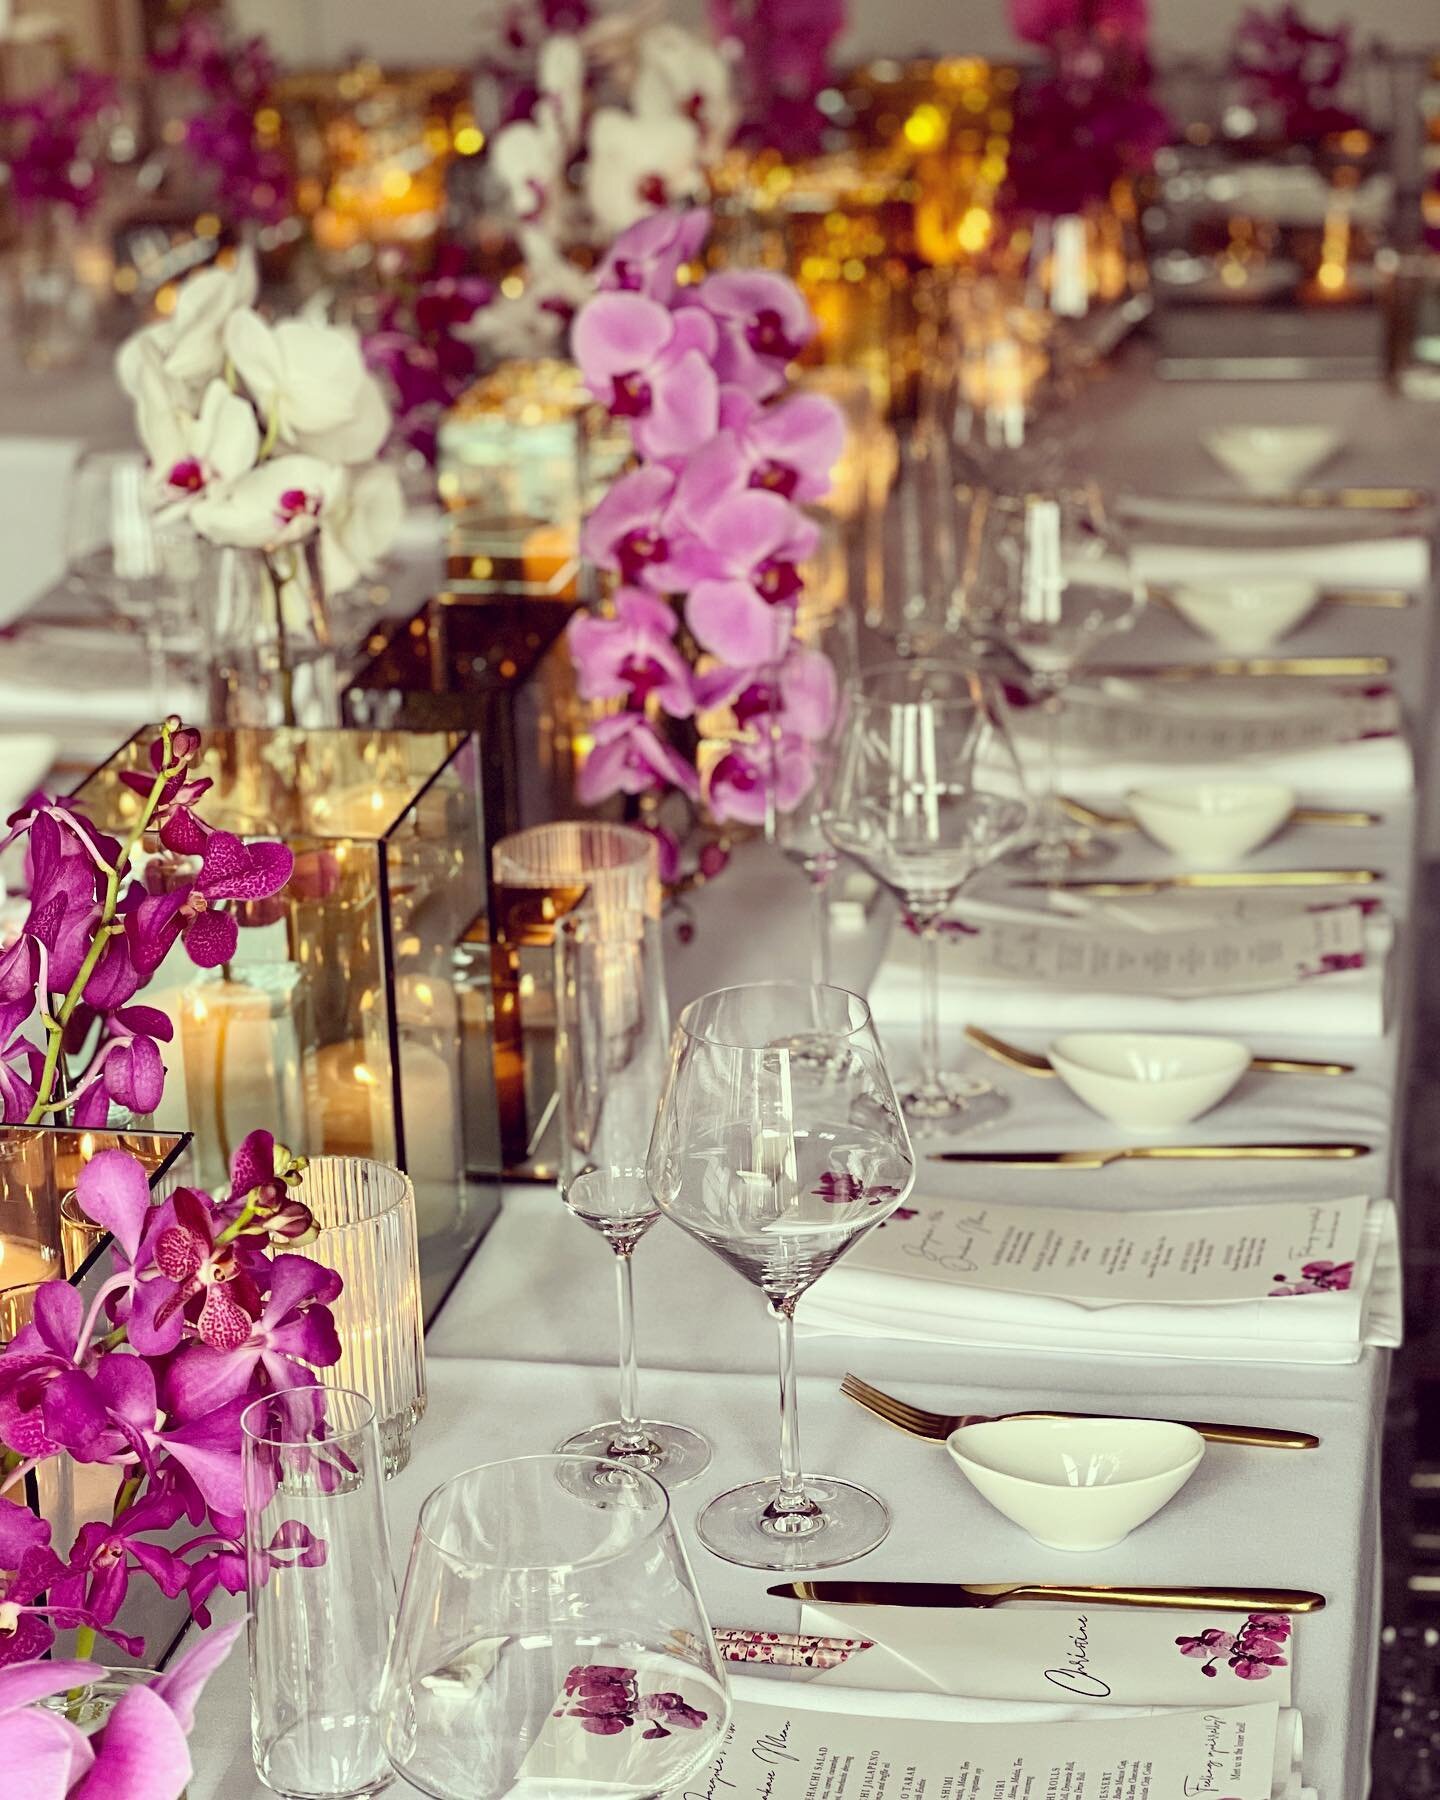 The dinner party; a timeless, classic, intimate, smashing good time.  Make it a 40th and relive the memories forever. 

Planning #racheldemarteevents 
Decor @revel_decor @laurieluedecking 
Paper @ericksondesignchicago 
Rentals @hallsrental 

#dinnerp